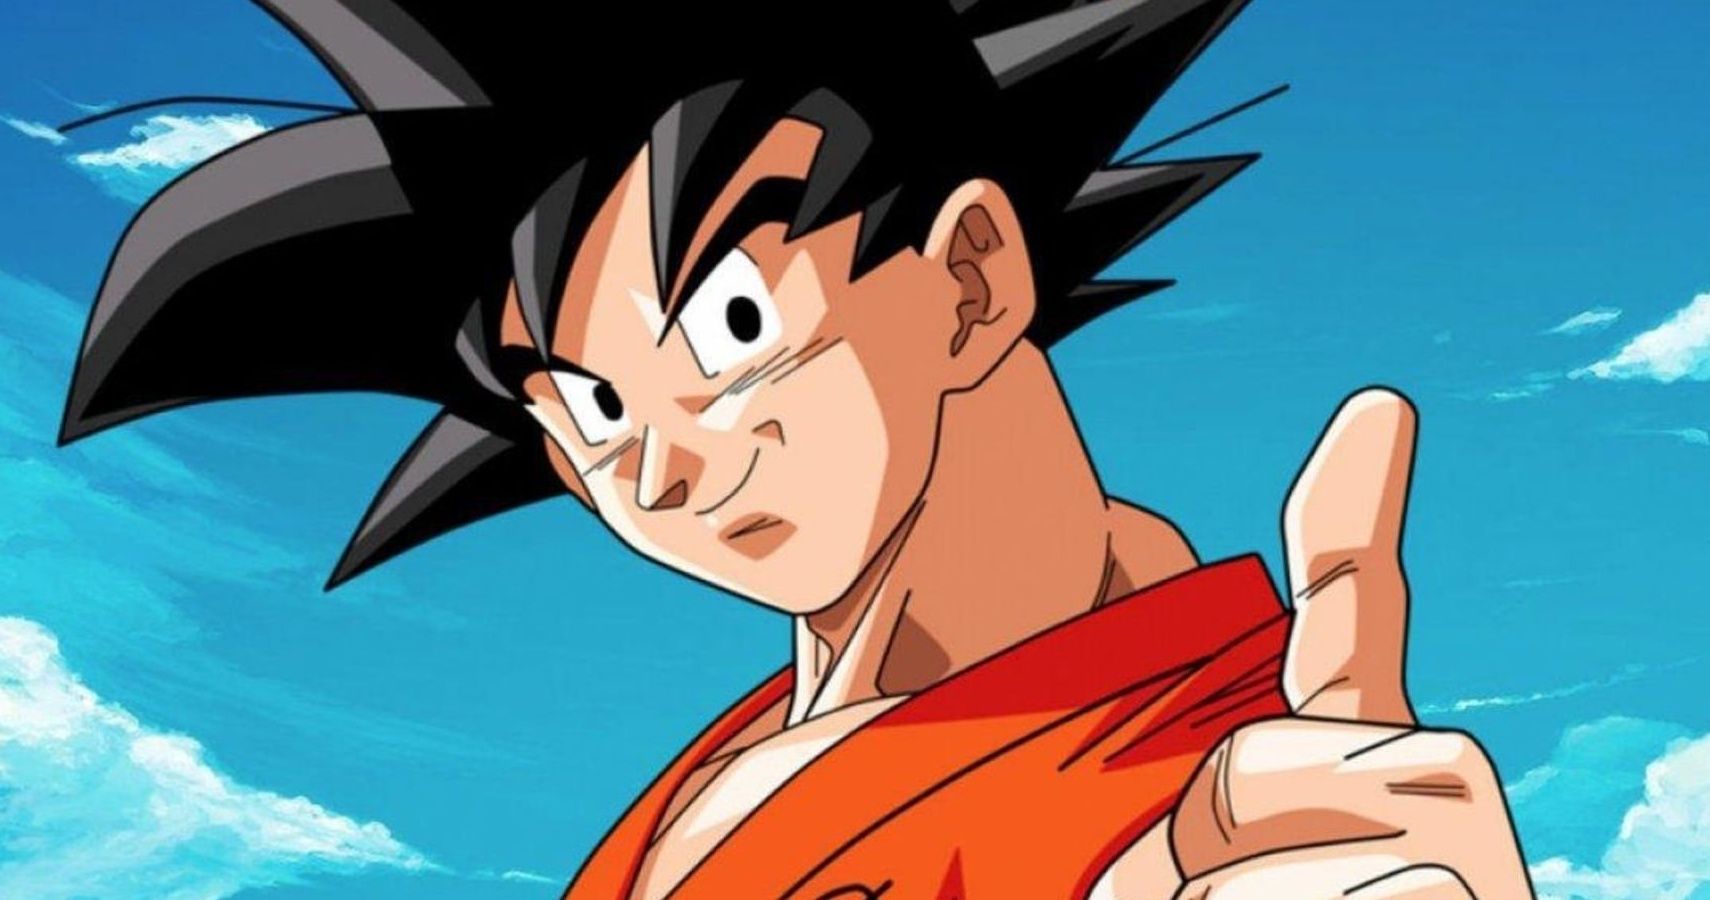 Dbz 10 Fan Art Pictures Of Goku Everyone Needs To See Cbr